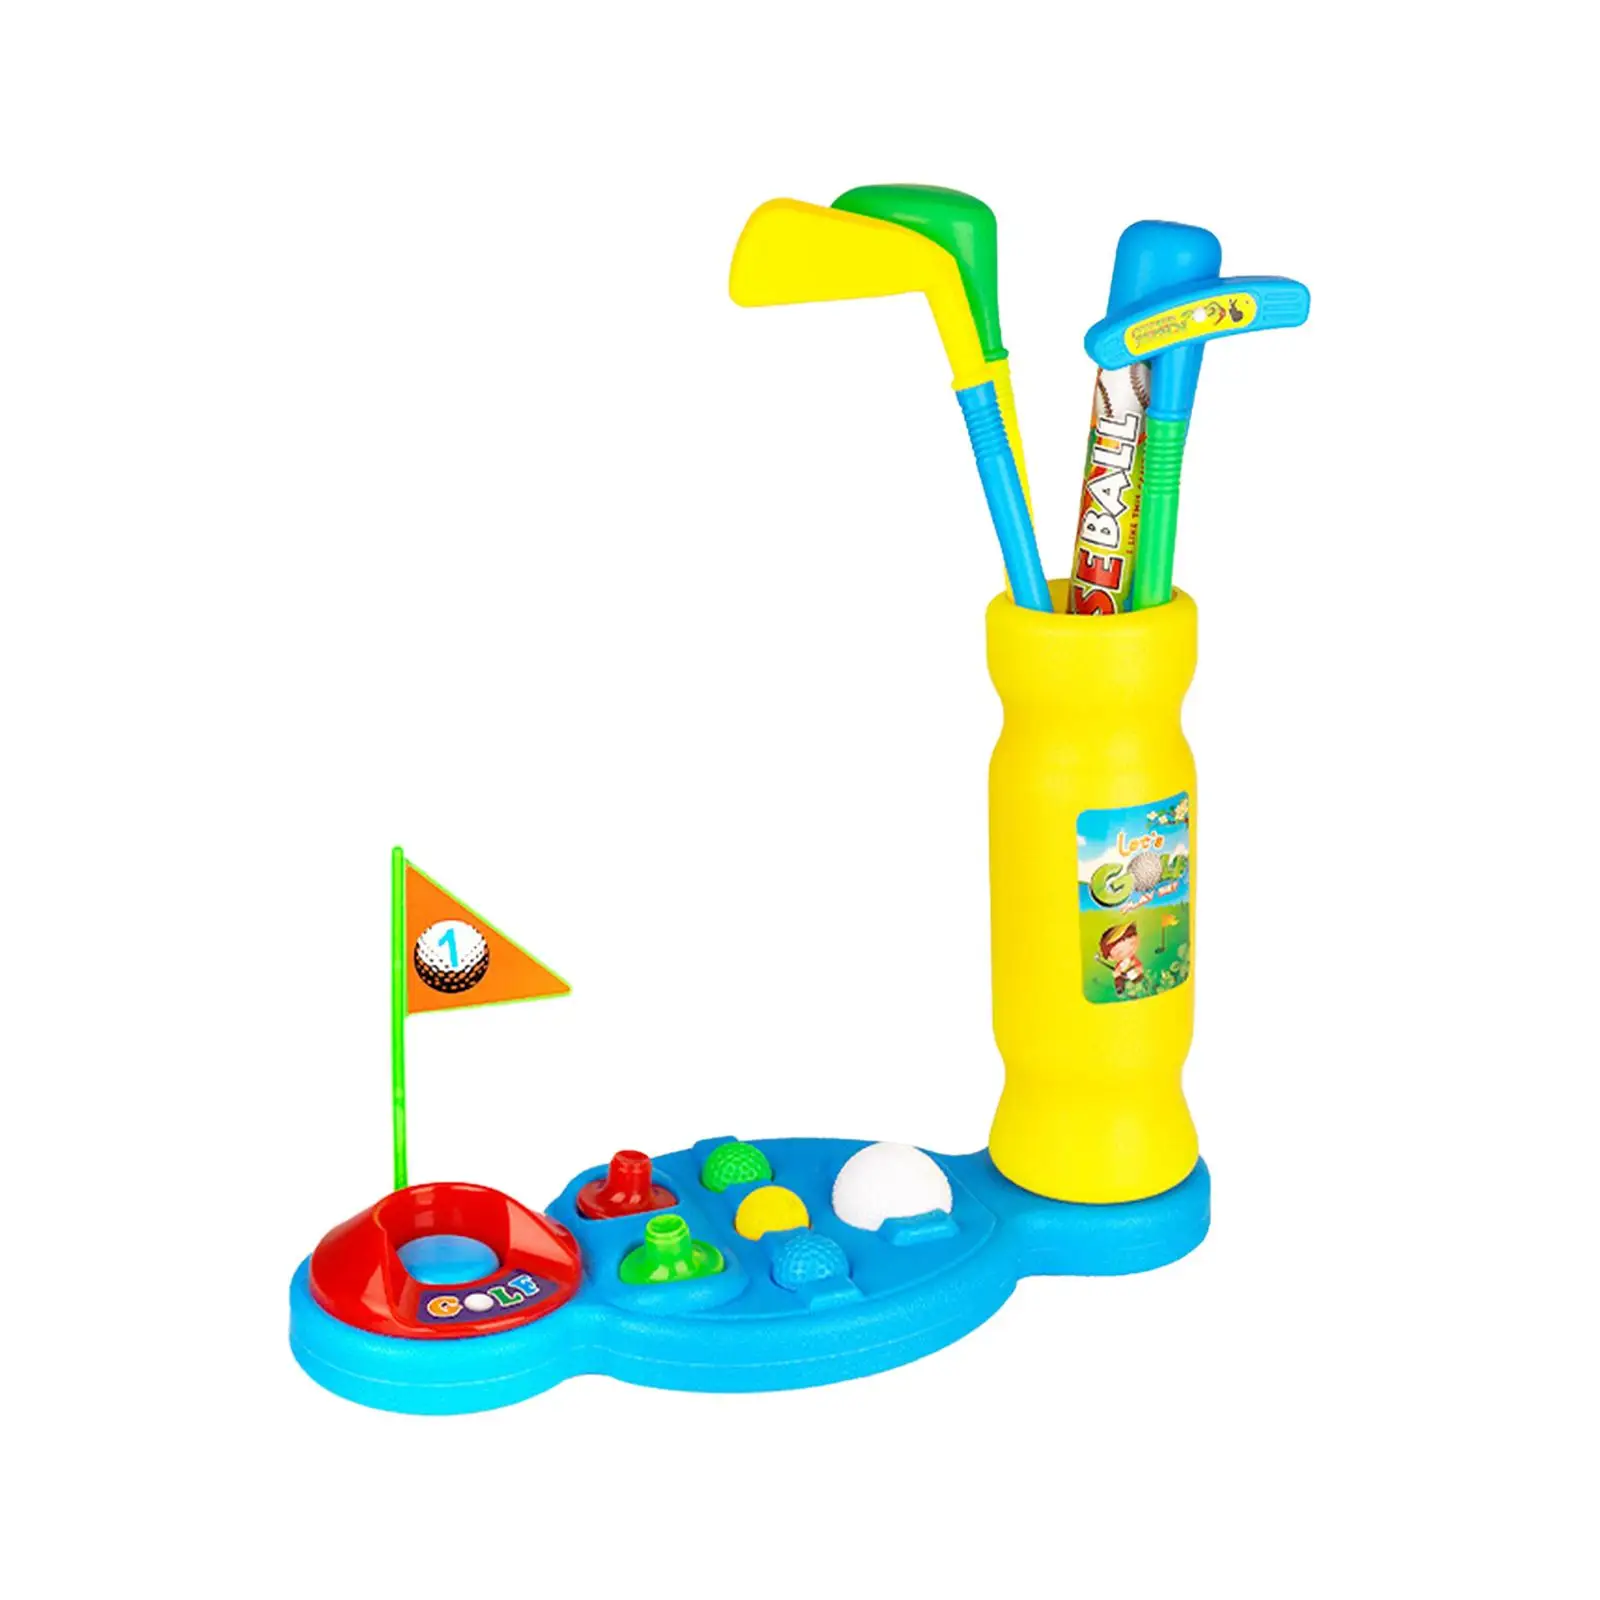 Boys Girls Golf Club Set Early Educational Toy Exercise Toy Training Golf Toy for Boys Girls Kids 3 4 5 6 Birthday Gifts Babies